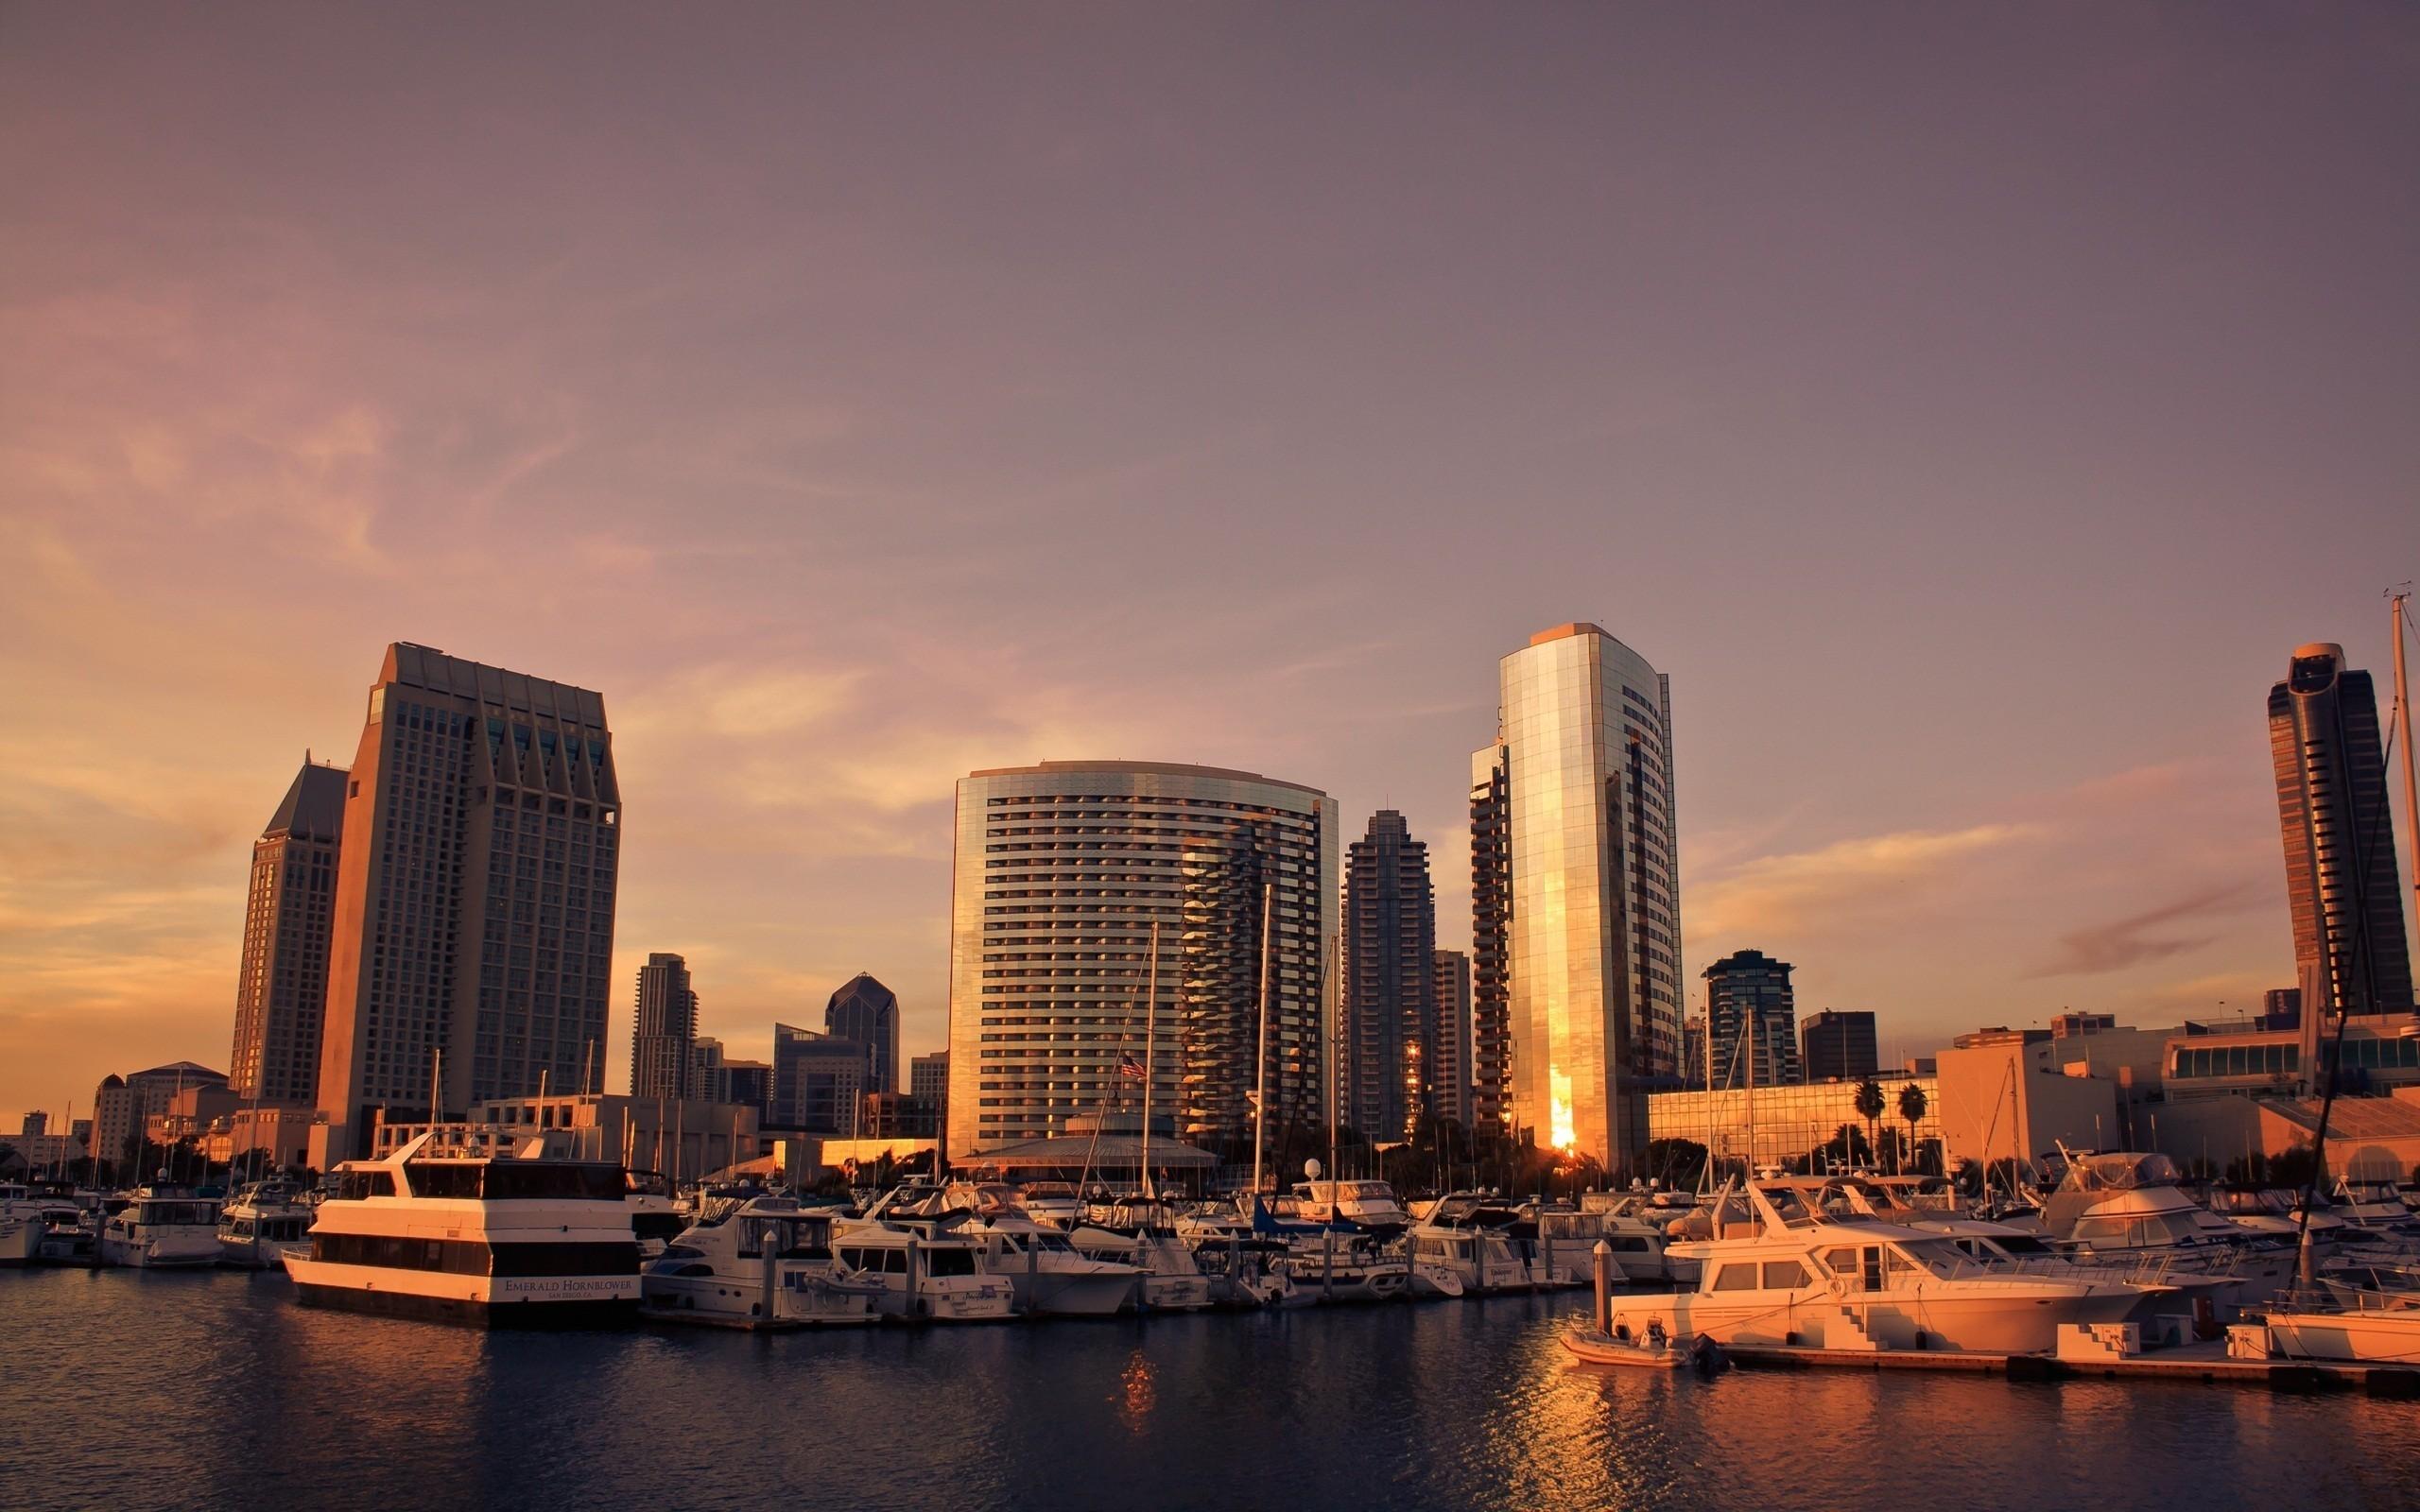 San diego cityscapes wallpaper. PC